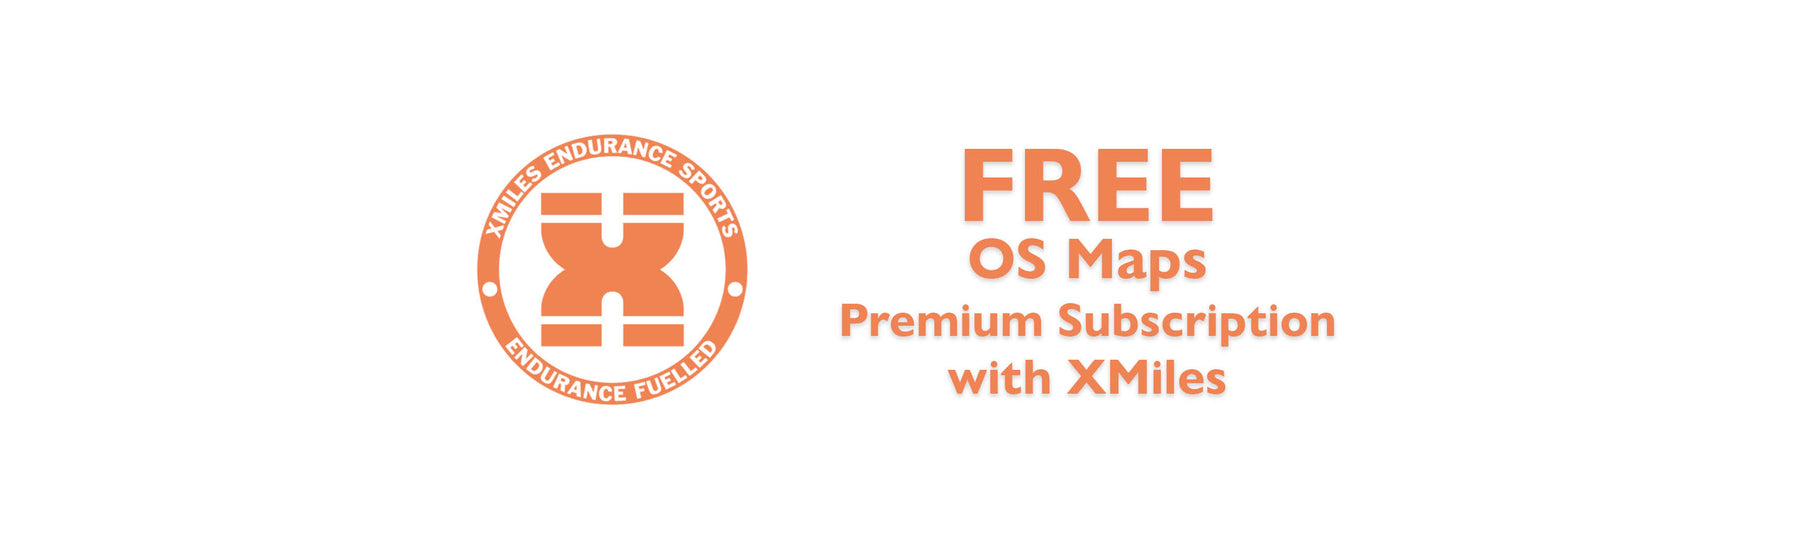 Free OS Maps Subscription